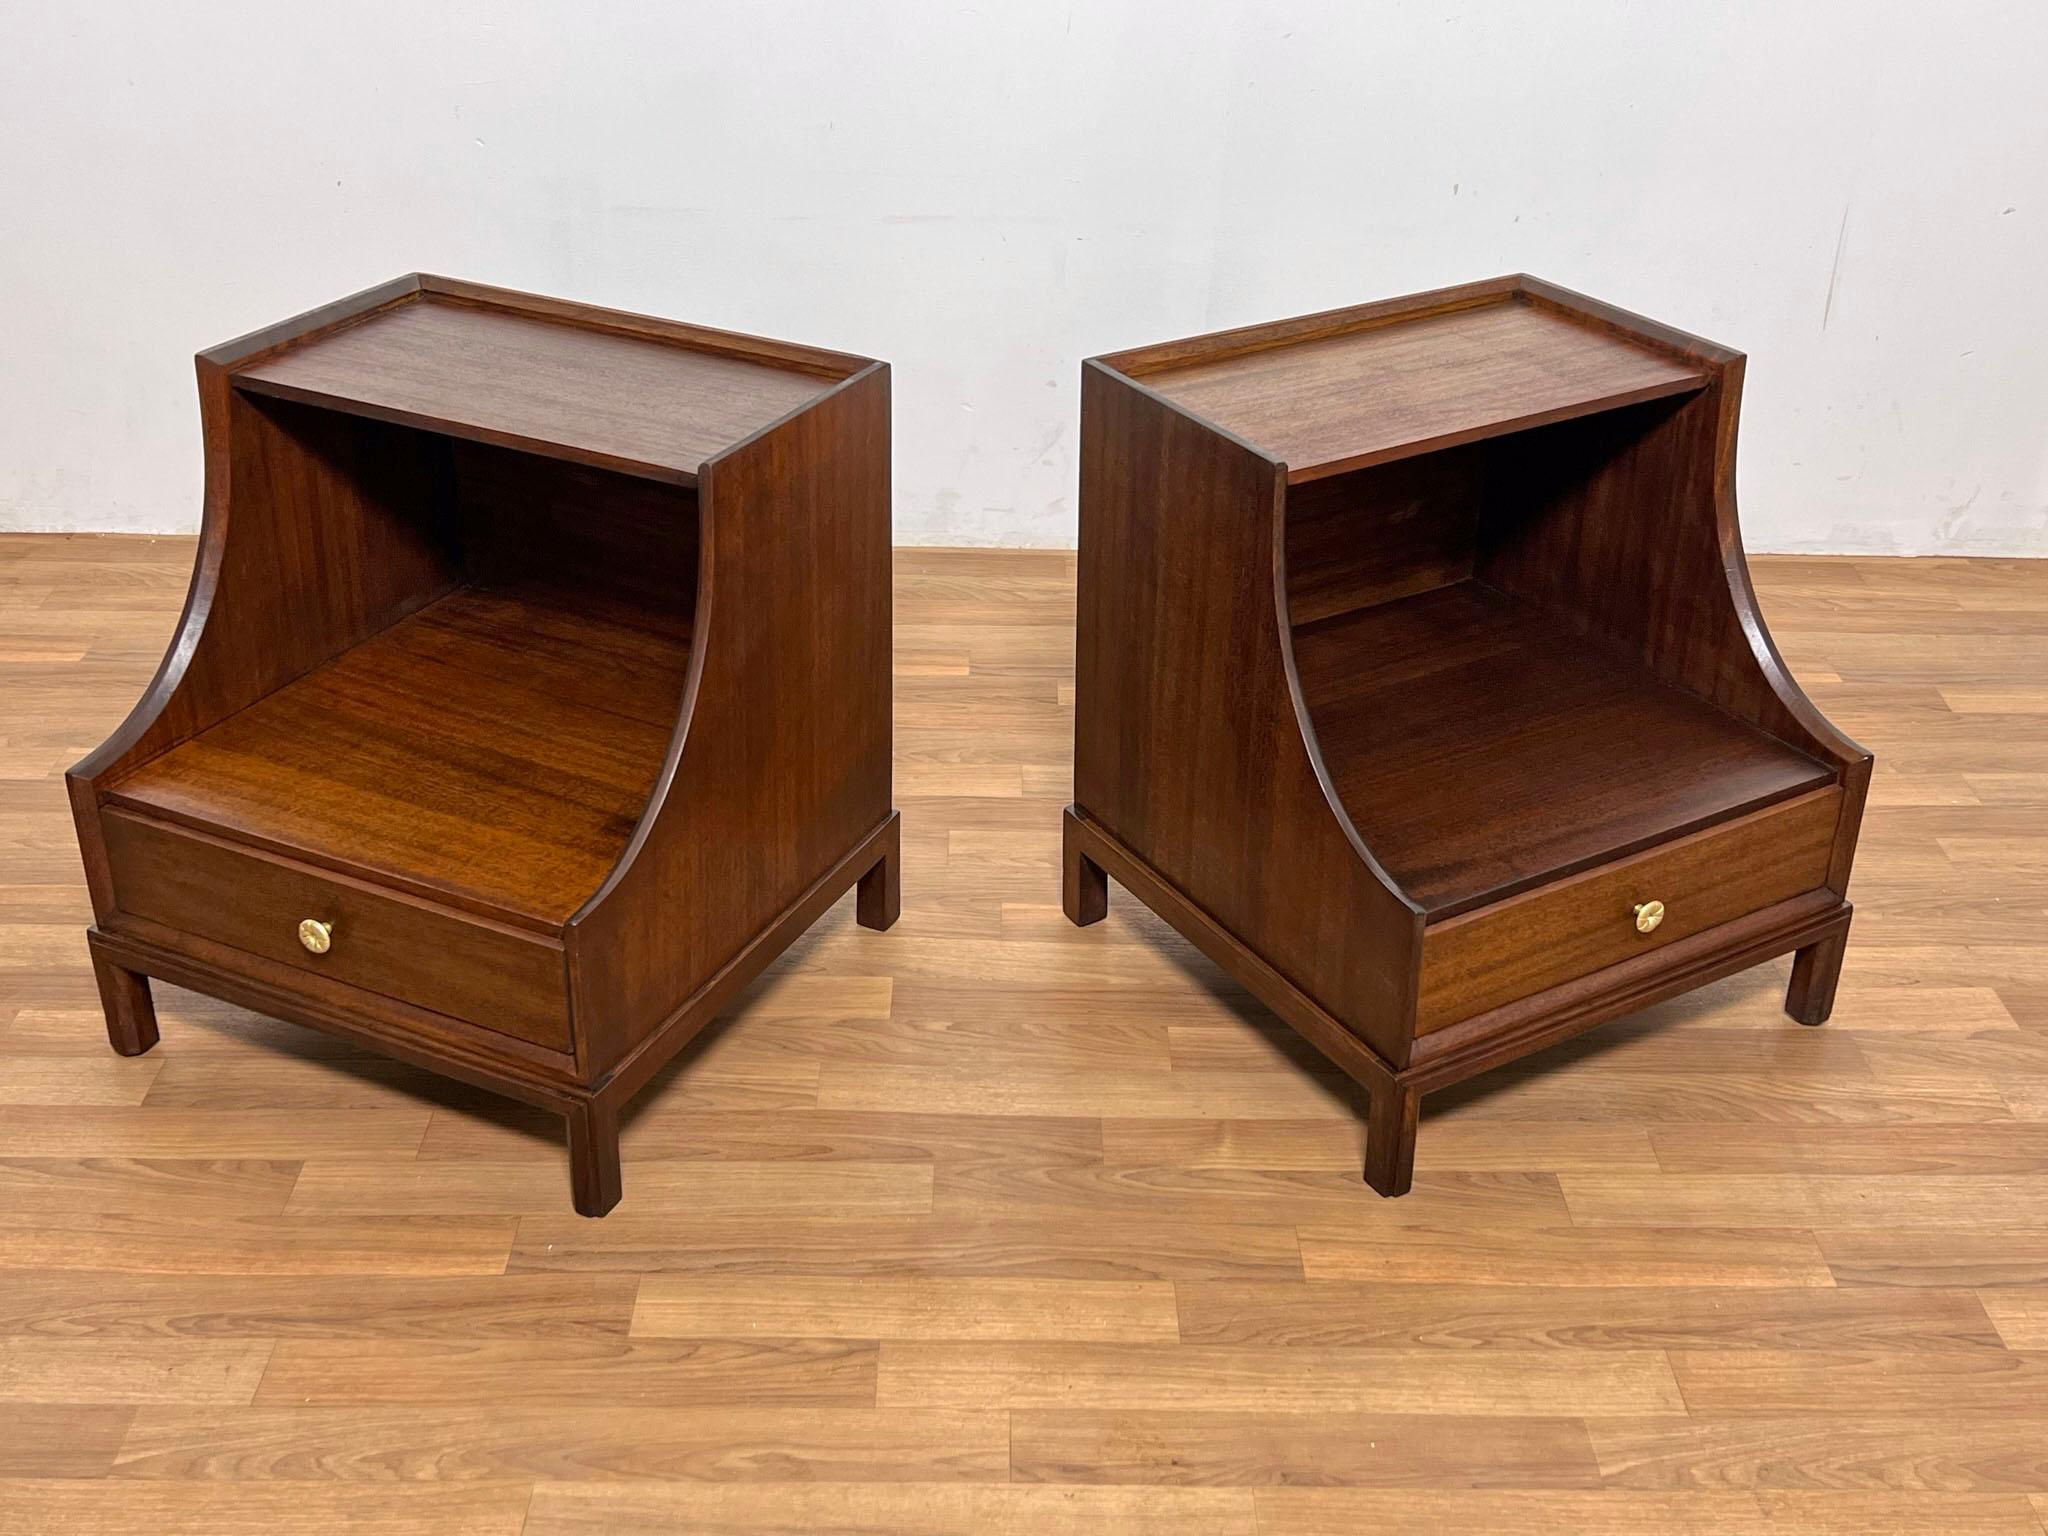 Pair of Tommi Parzinger for Charak Modern Night Stands, circa 1950s For Sale 2